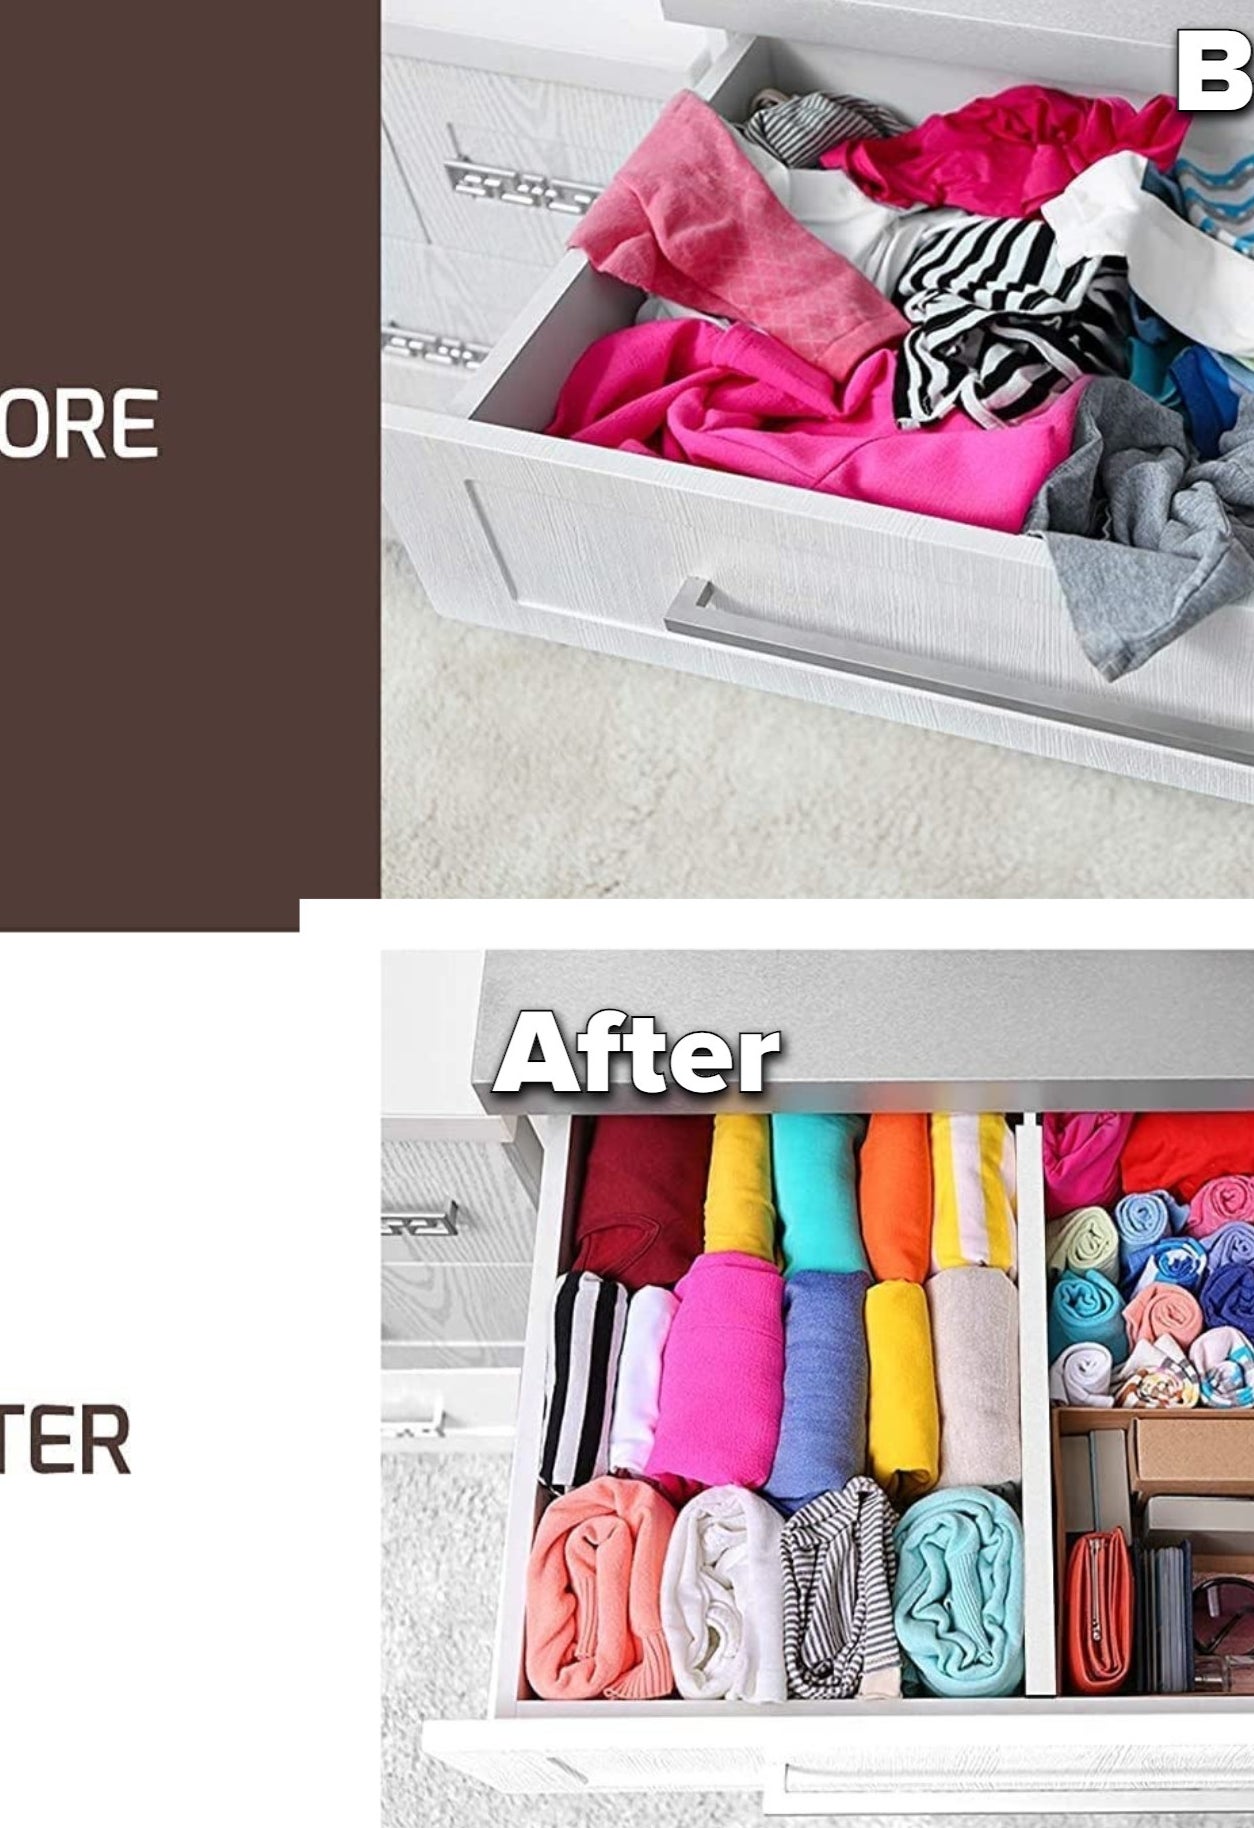 a before and after where the after shows neatly organized drawers